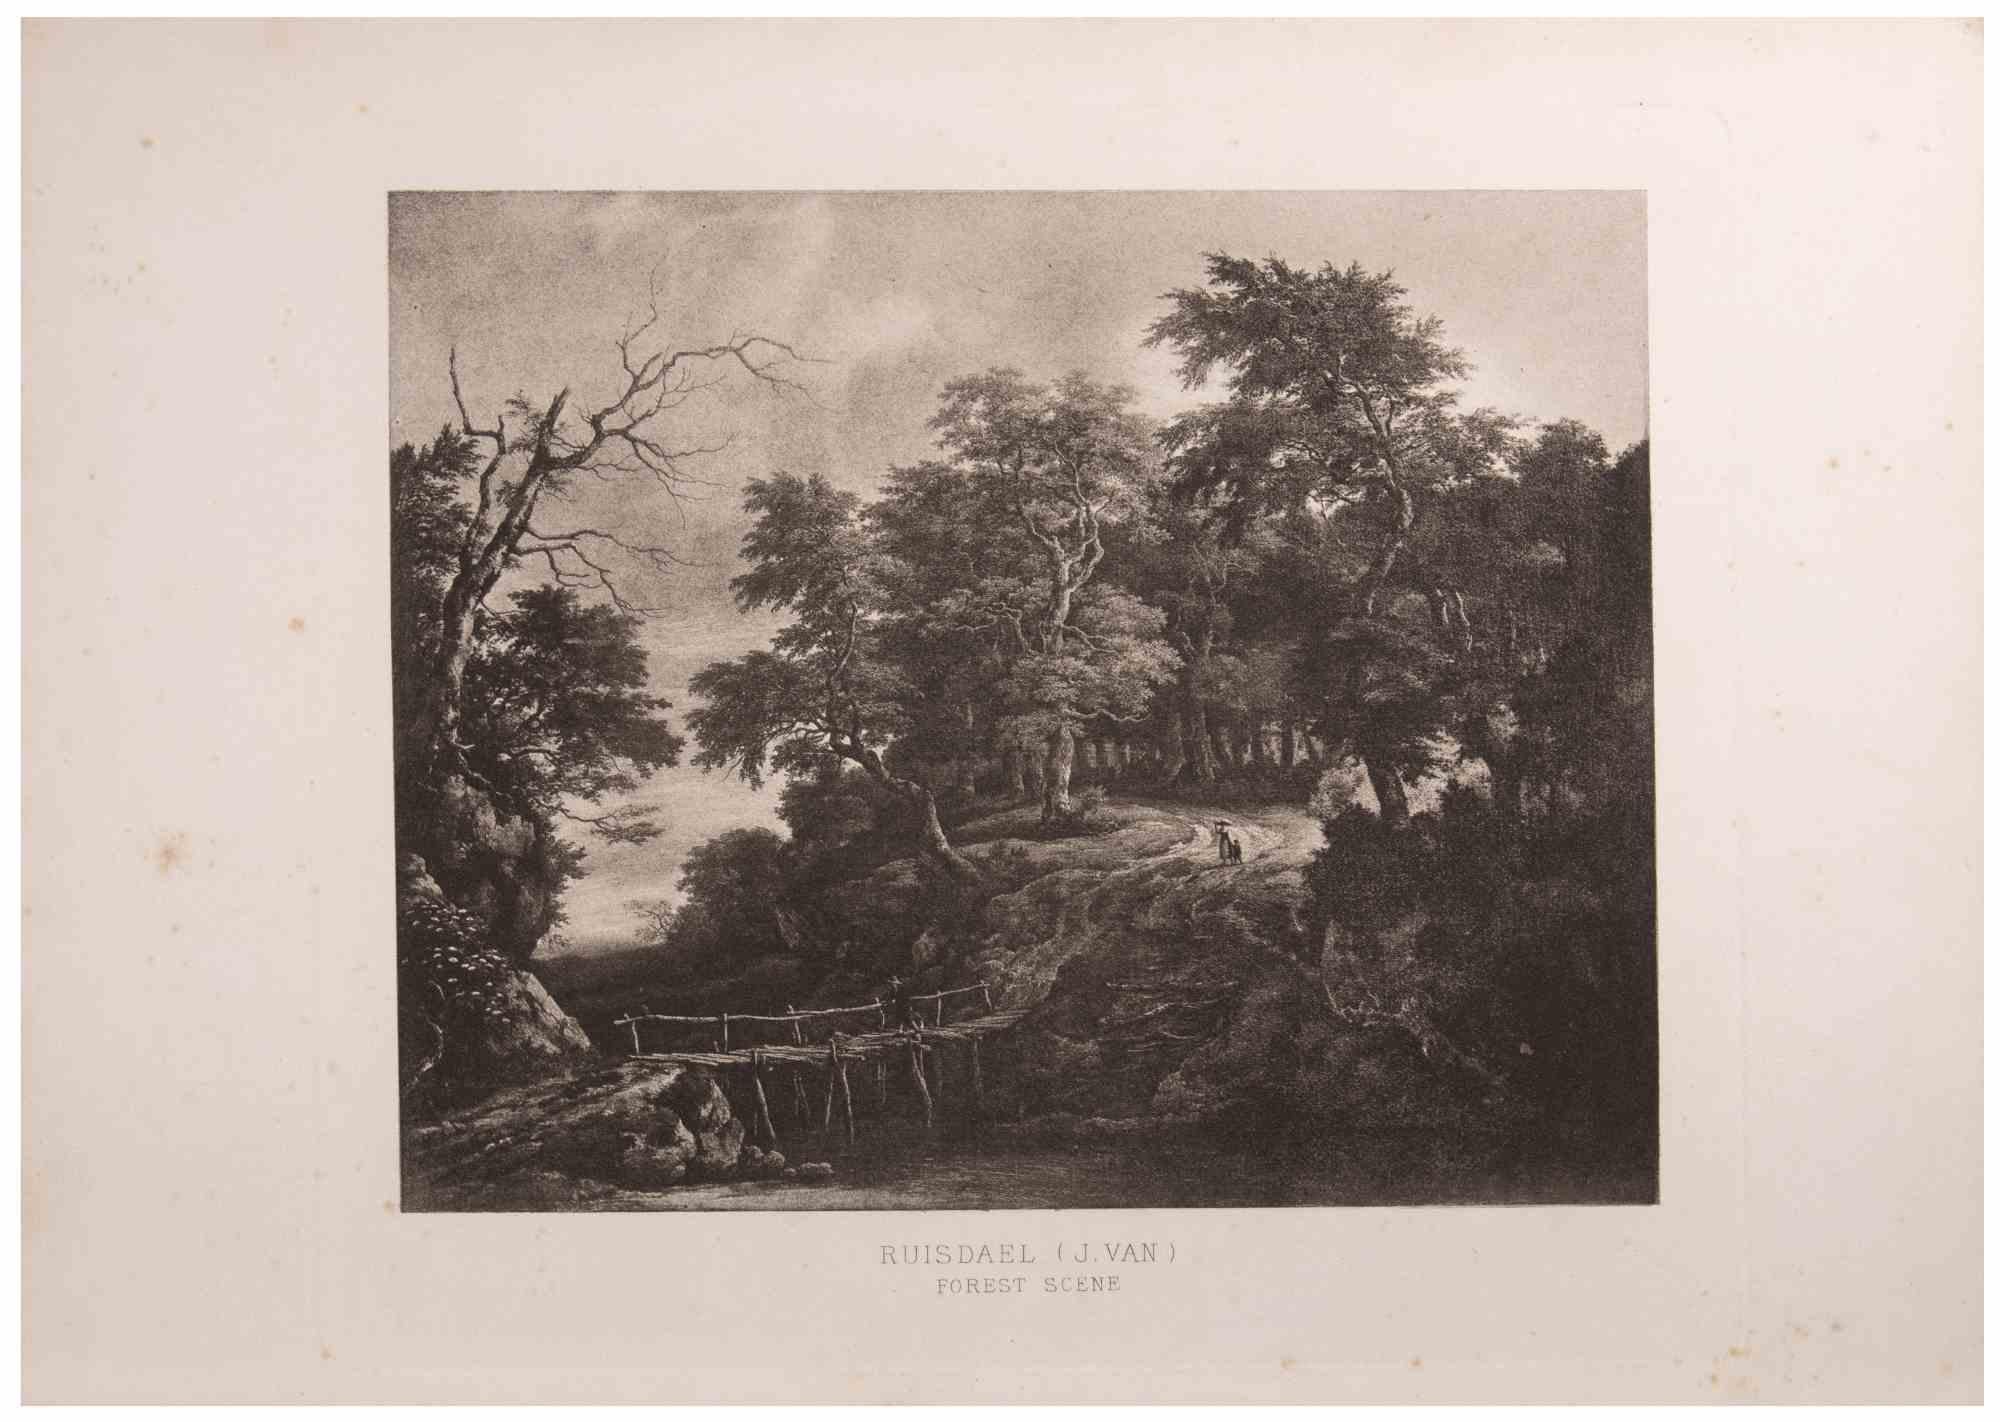 Forest Scene is an etching on paper realized by Jacob Van Ruisdael in the 18th century.

Signed on plate.

Title on the lower center.

Good condition.

The artwork expressed poetically through well-defined chiaroscuro with admirble fine details.